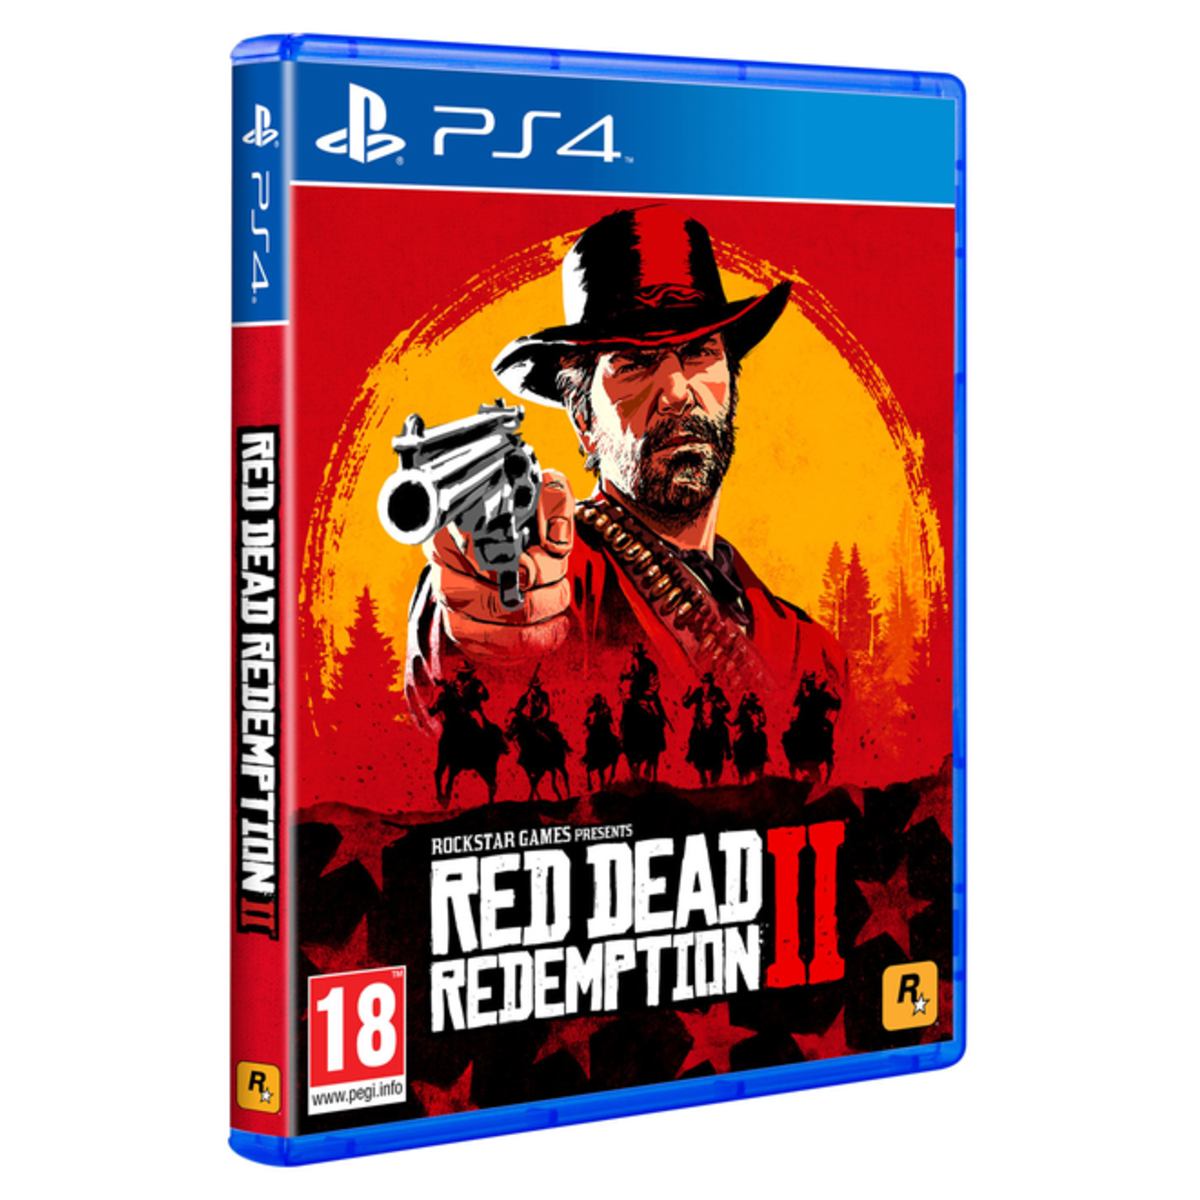 Red Dead Redemption 2 - PS4 | ShopTo.net